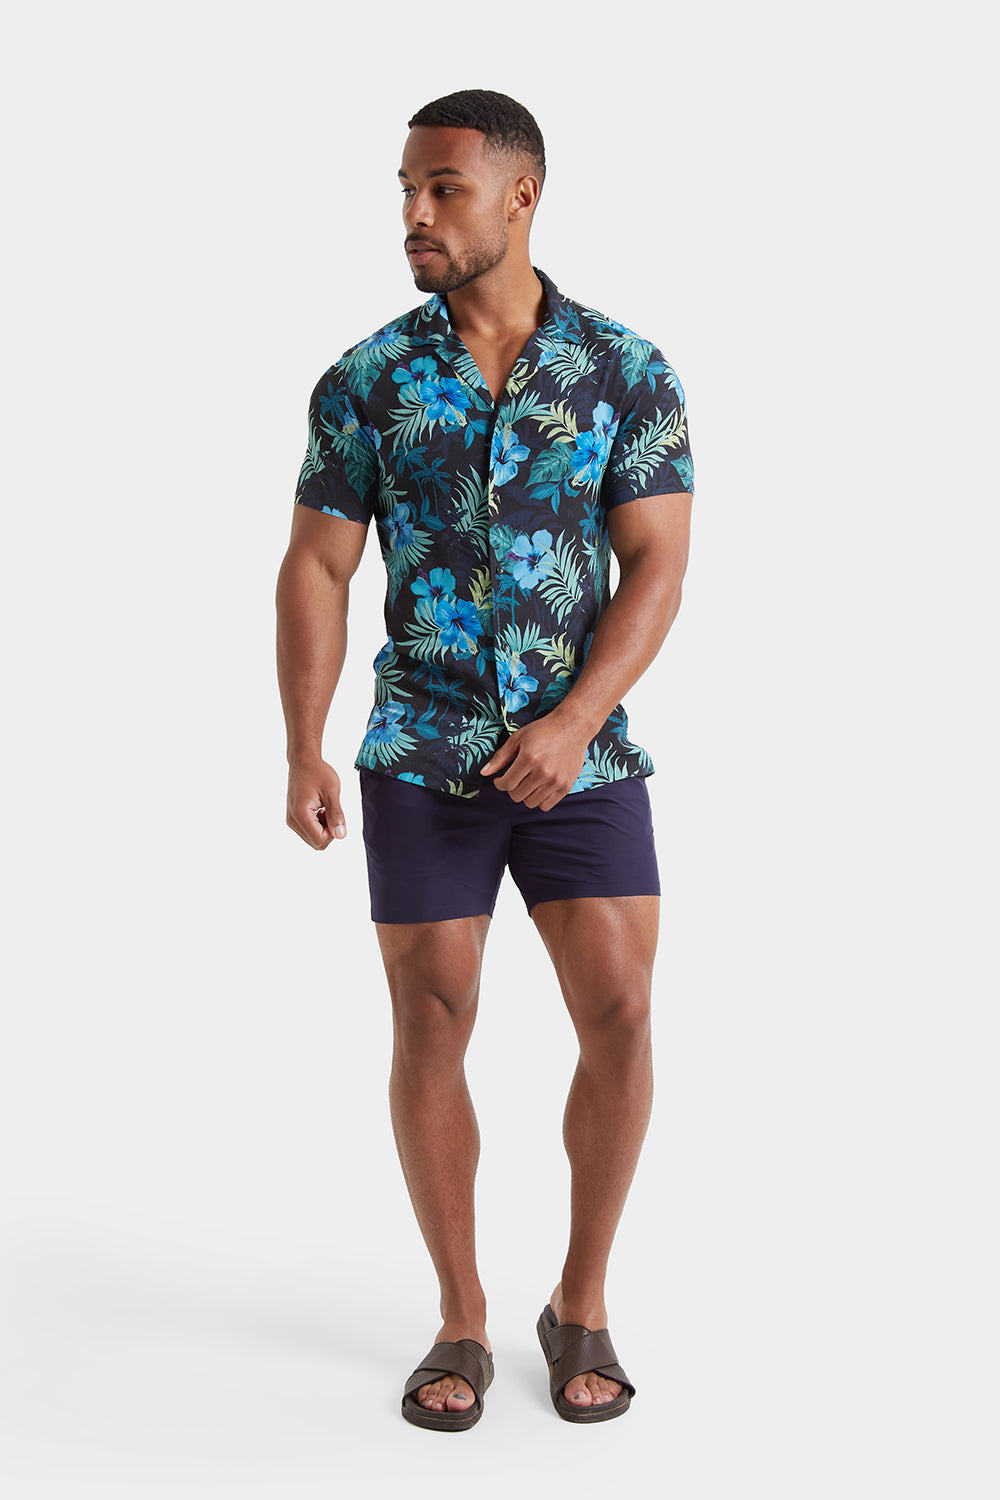 Printed Shirt in Navy Tropical Palms - TAILORED ATHLETE - ROW